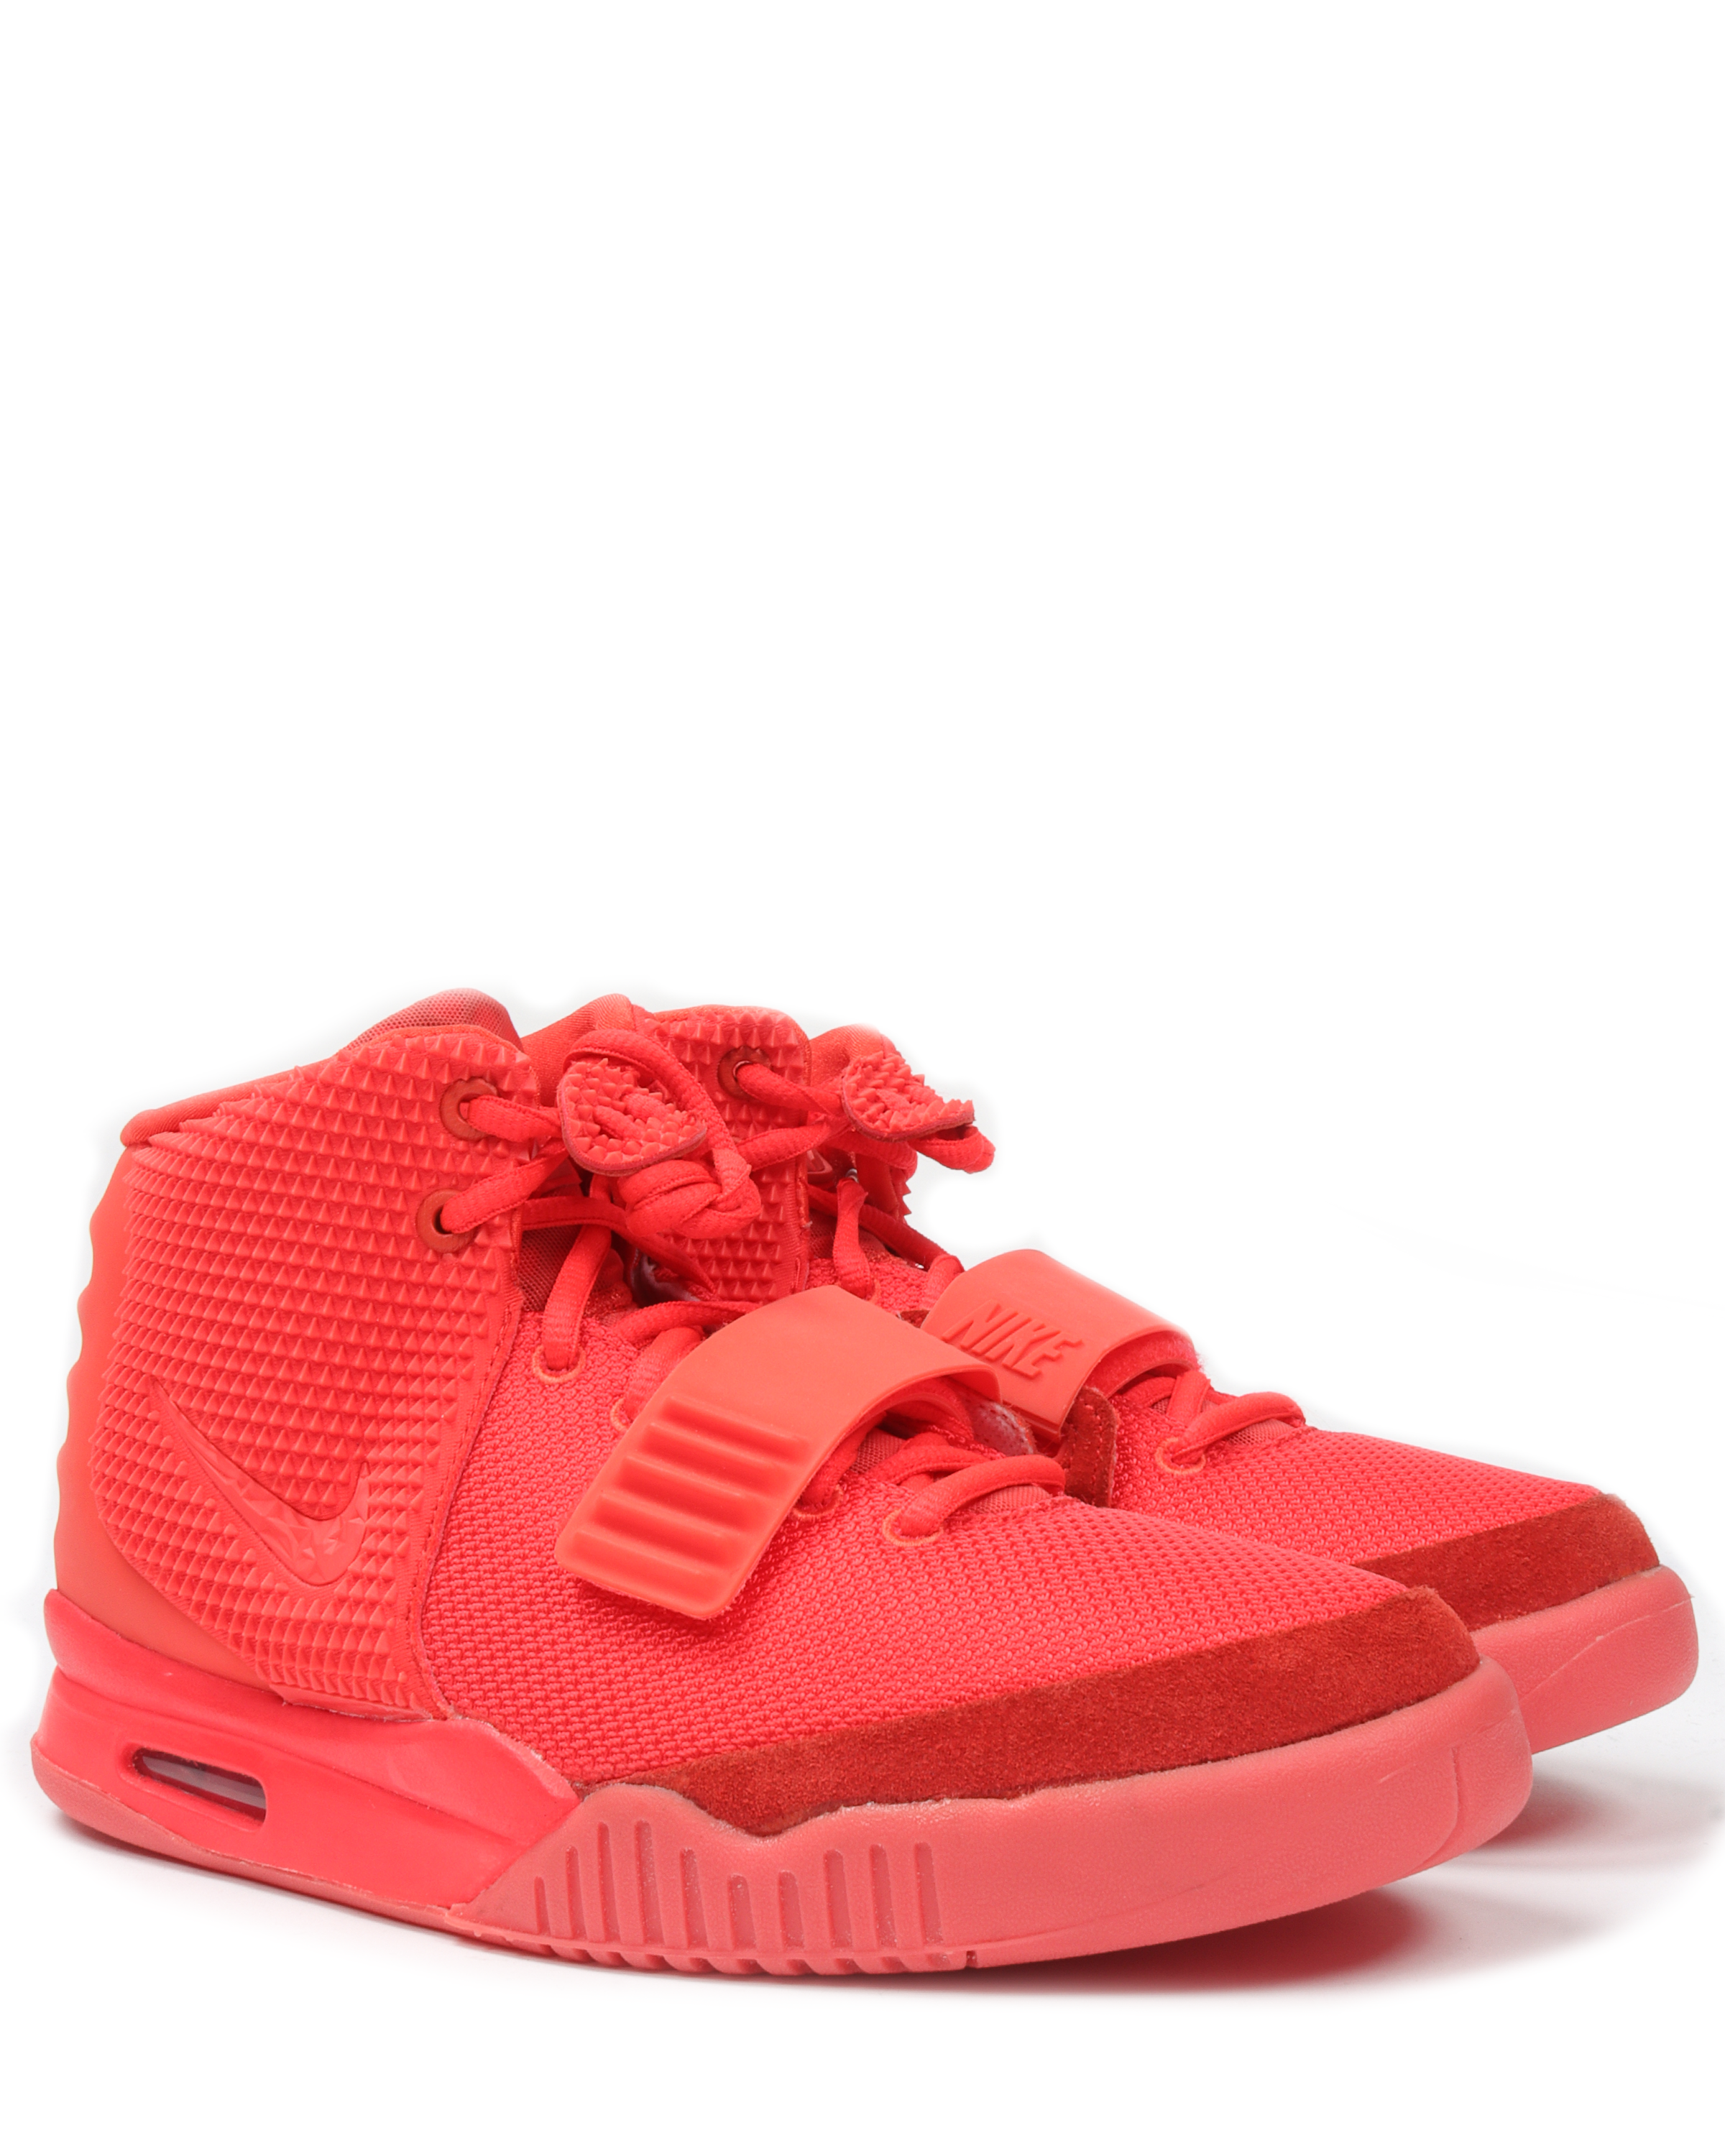 Air Yeezy 2 "Red October"